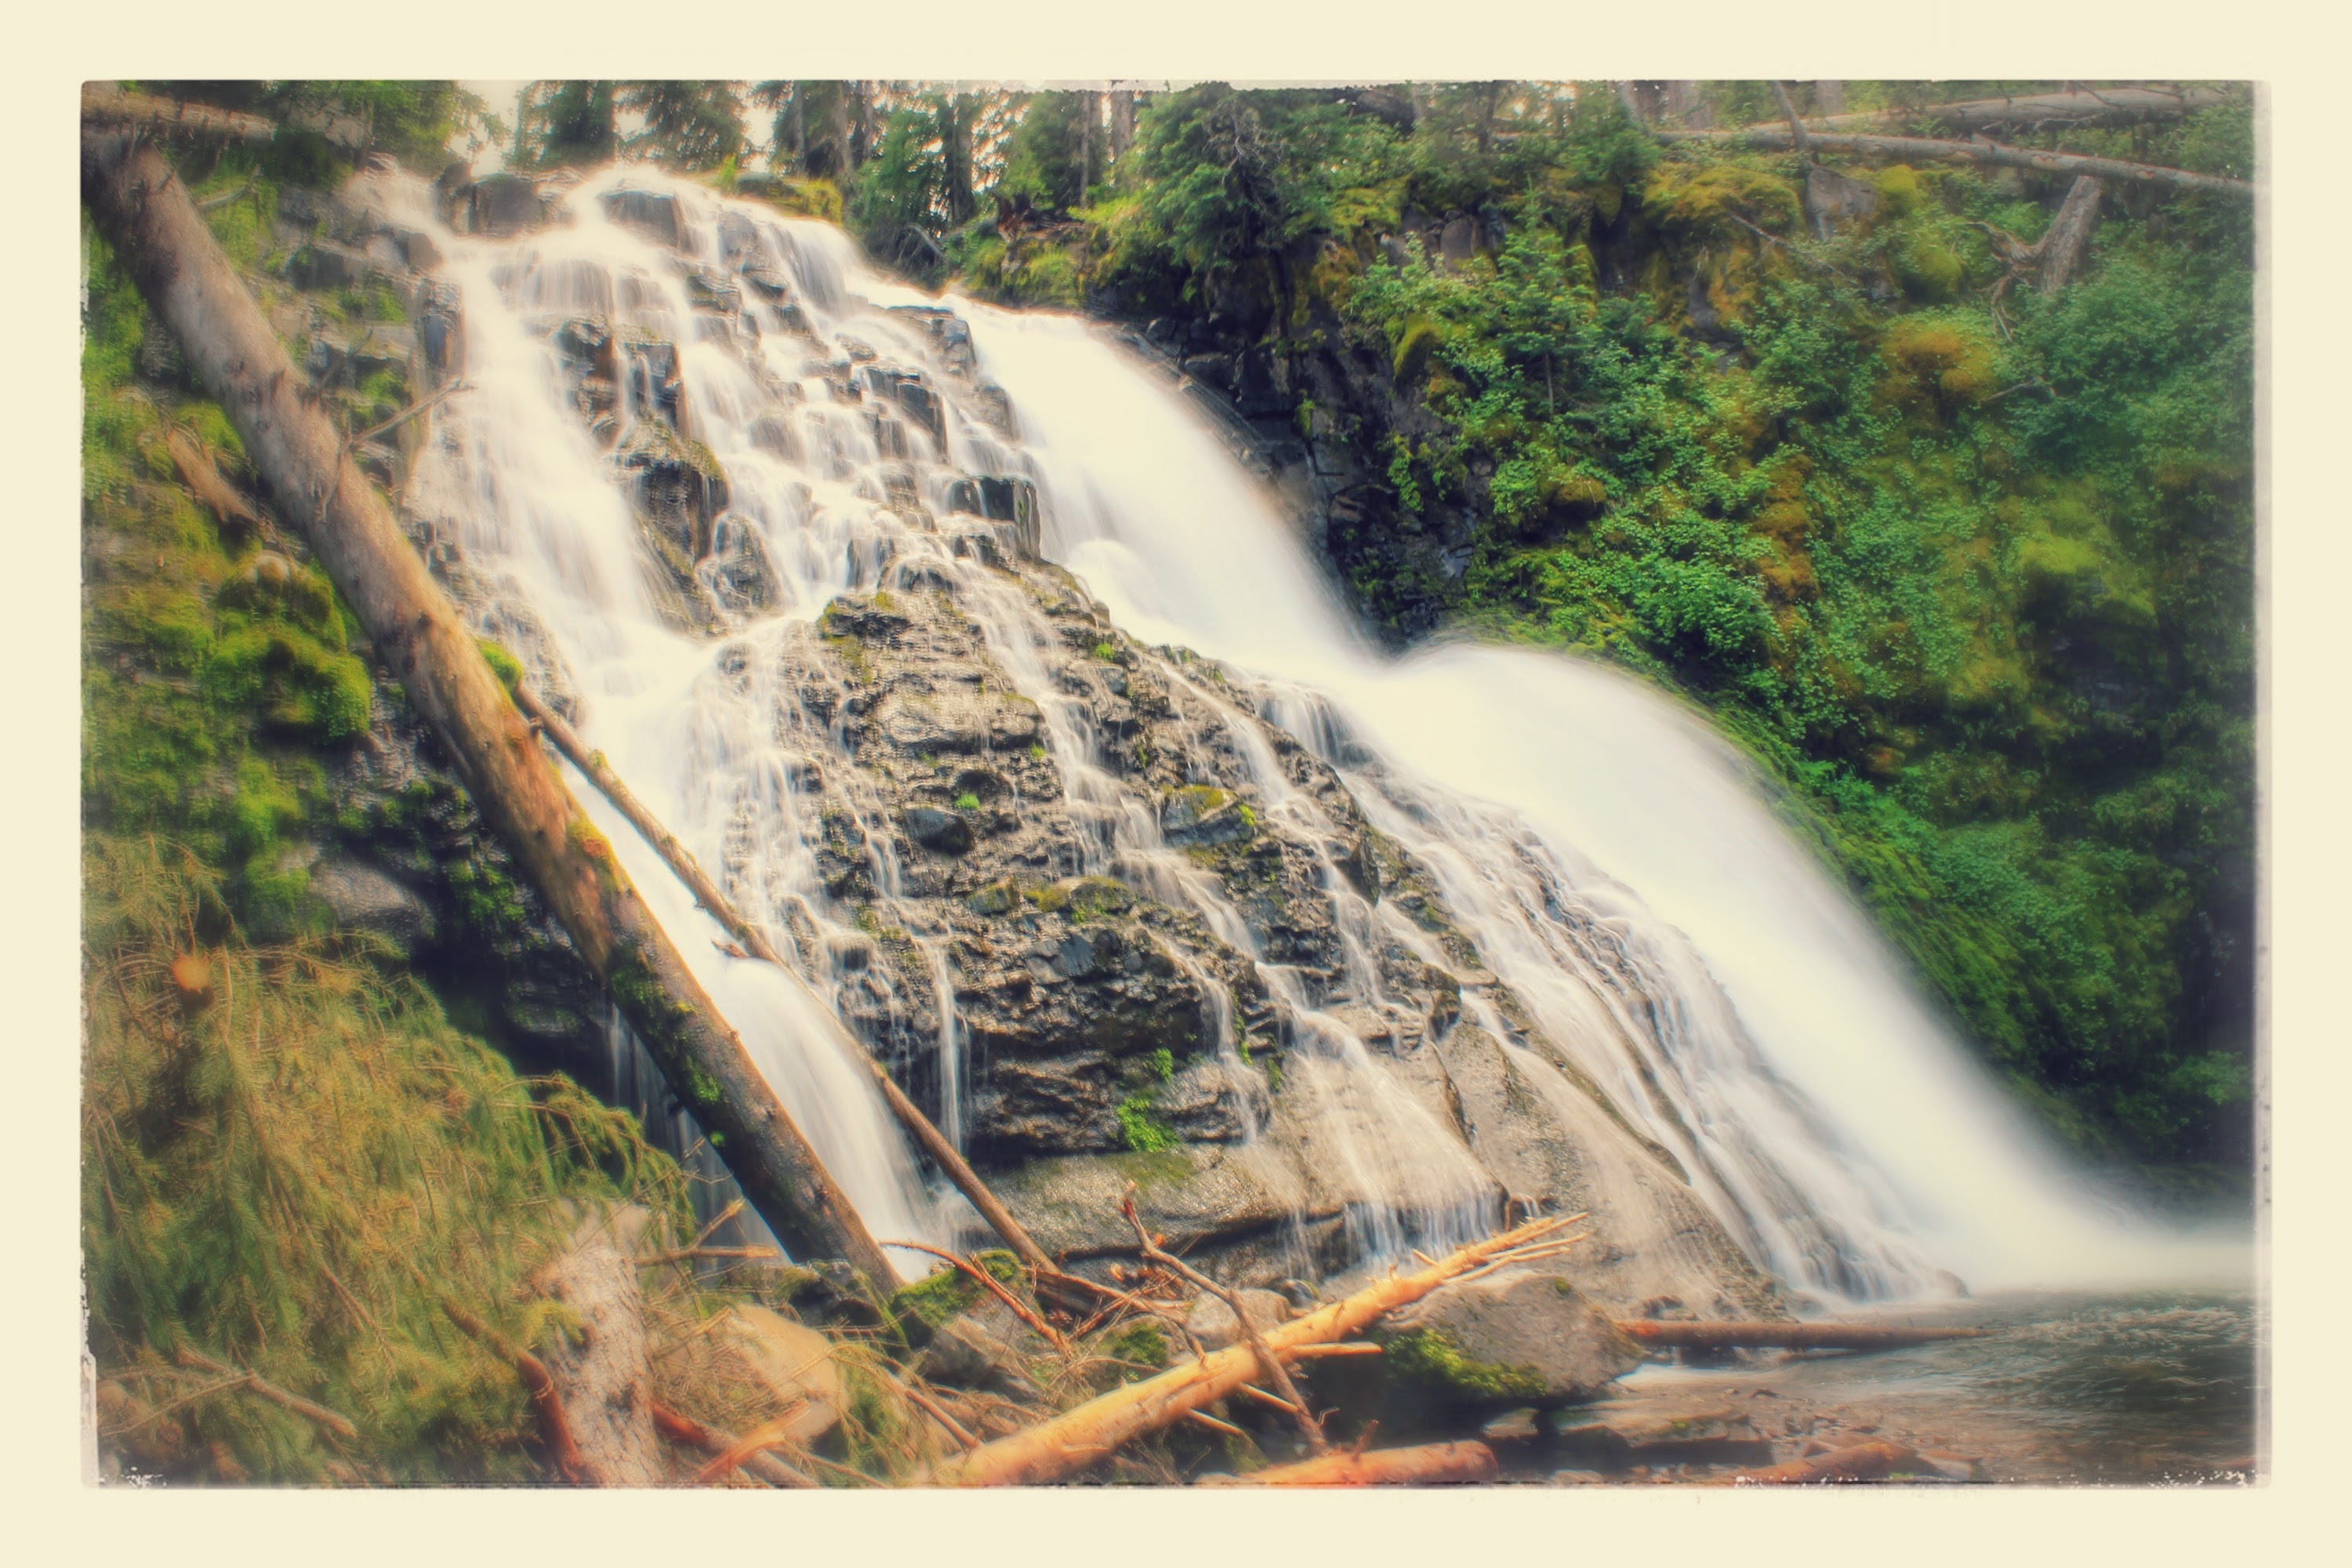 The winning photo of Grotto Falls from Trade Risk Guaranty's employee photography contest.